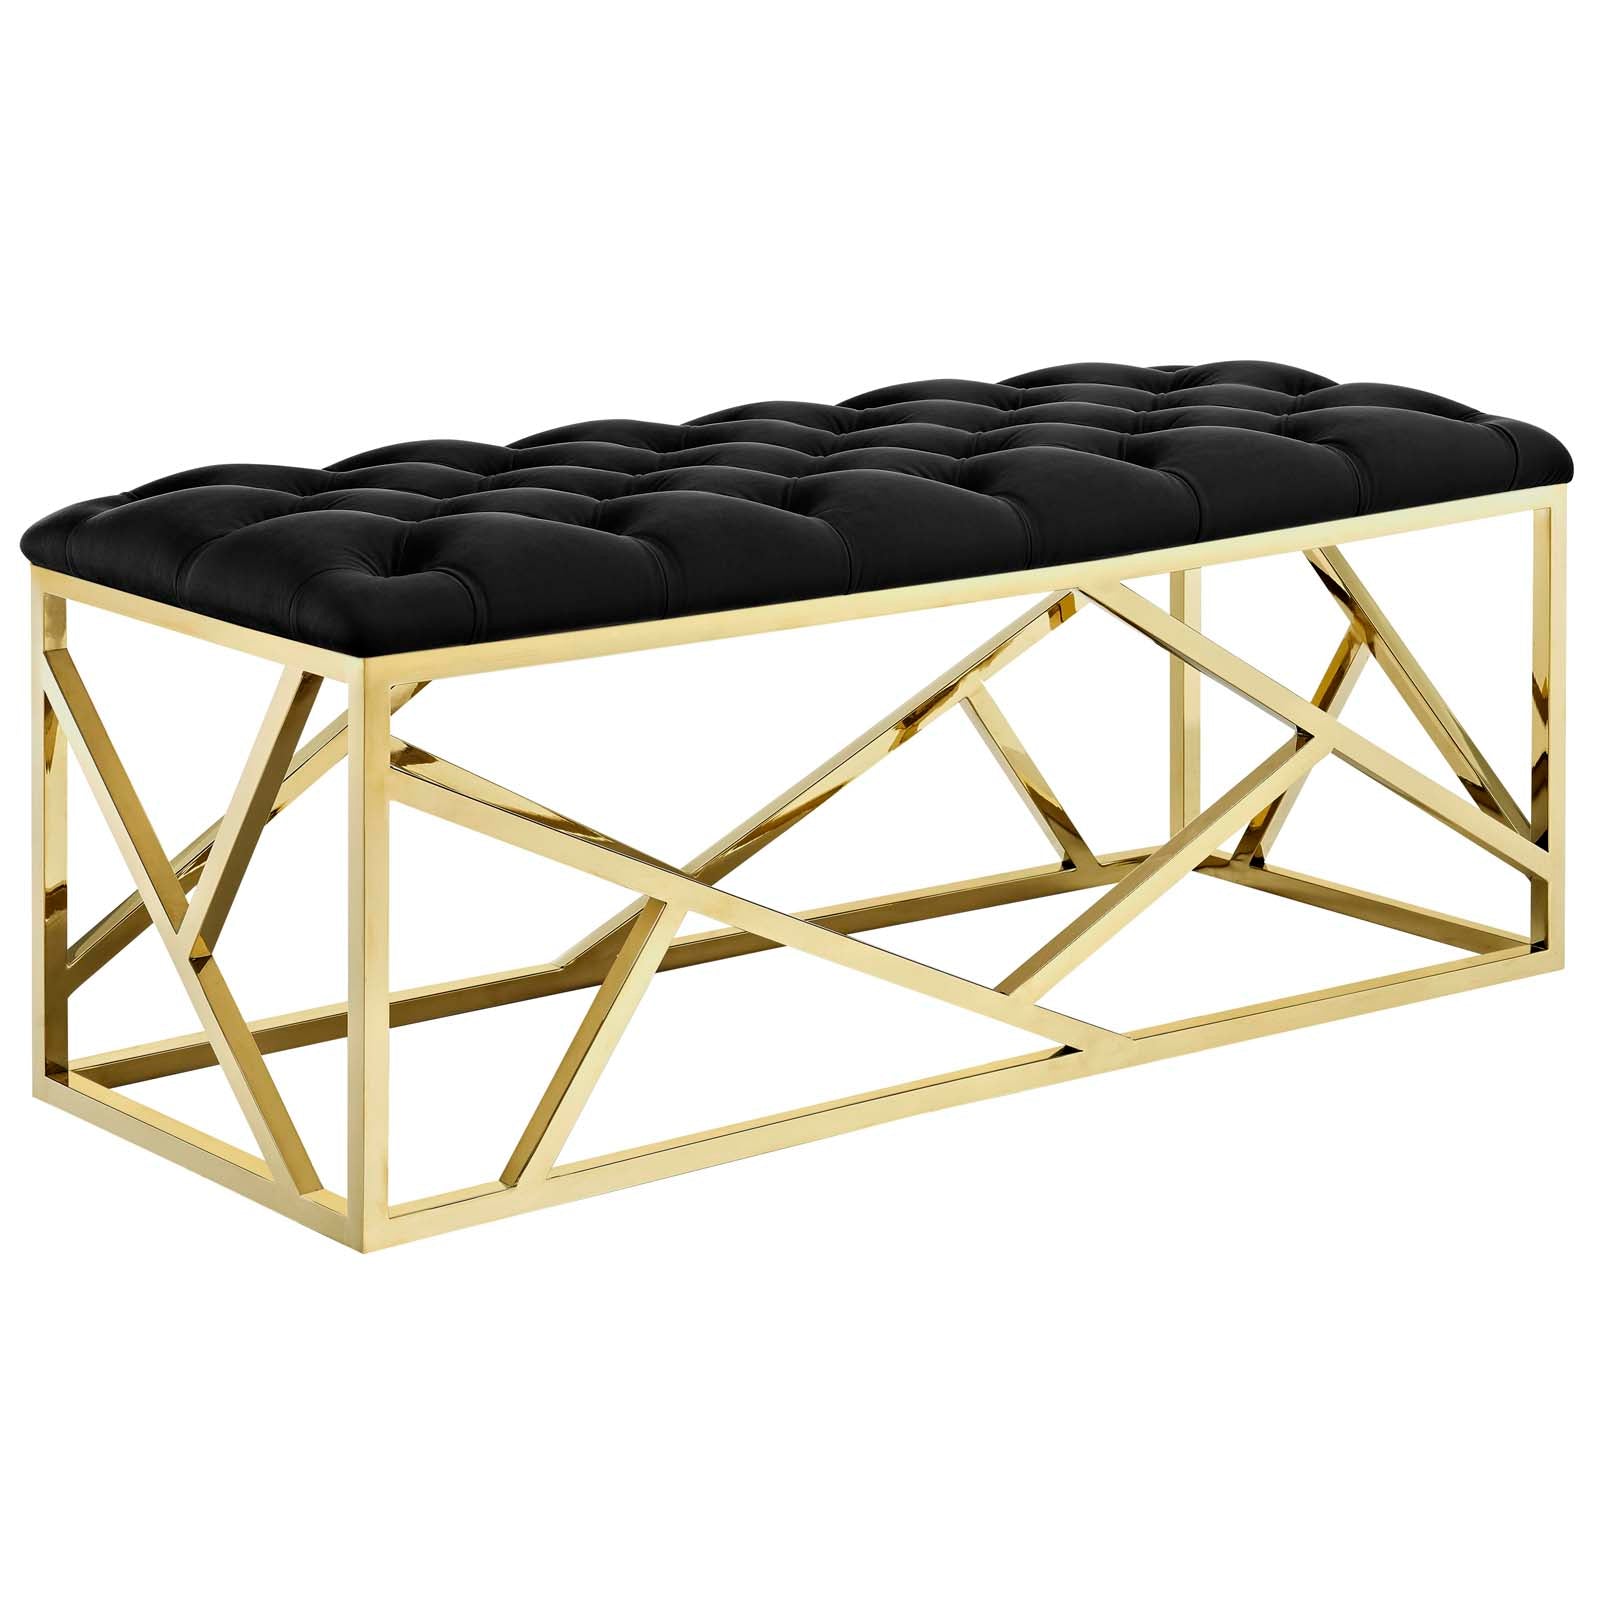 Intersperse Bench - East Shore Modern Home Furnishings